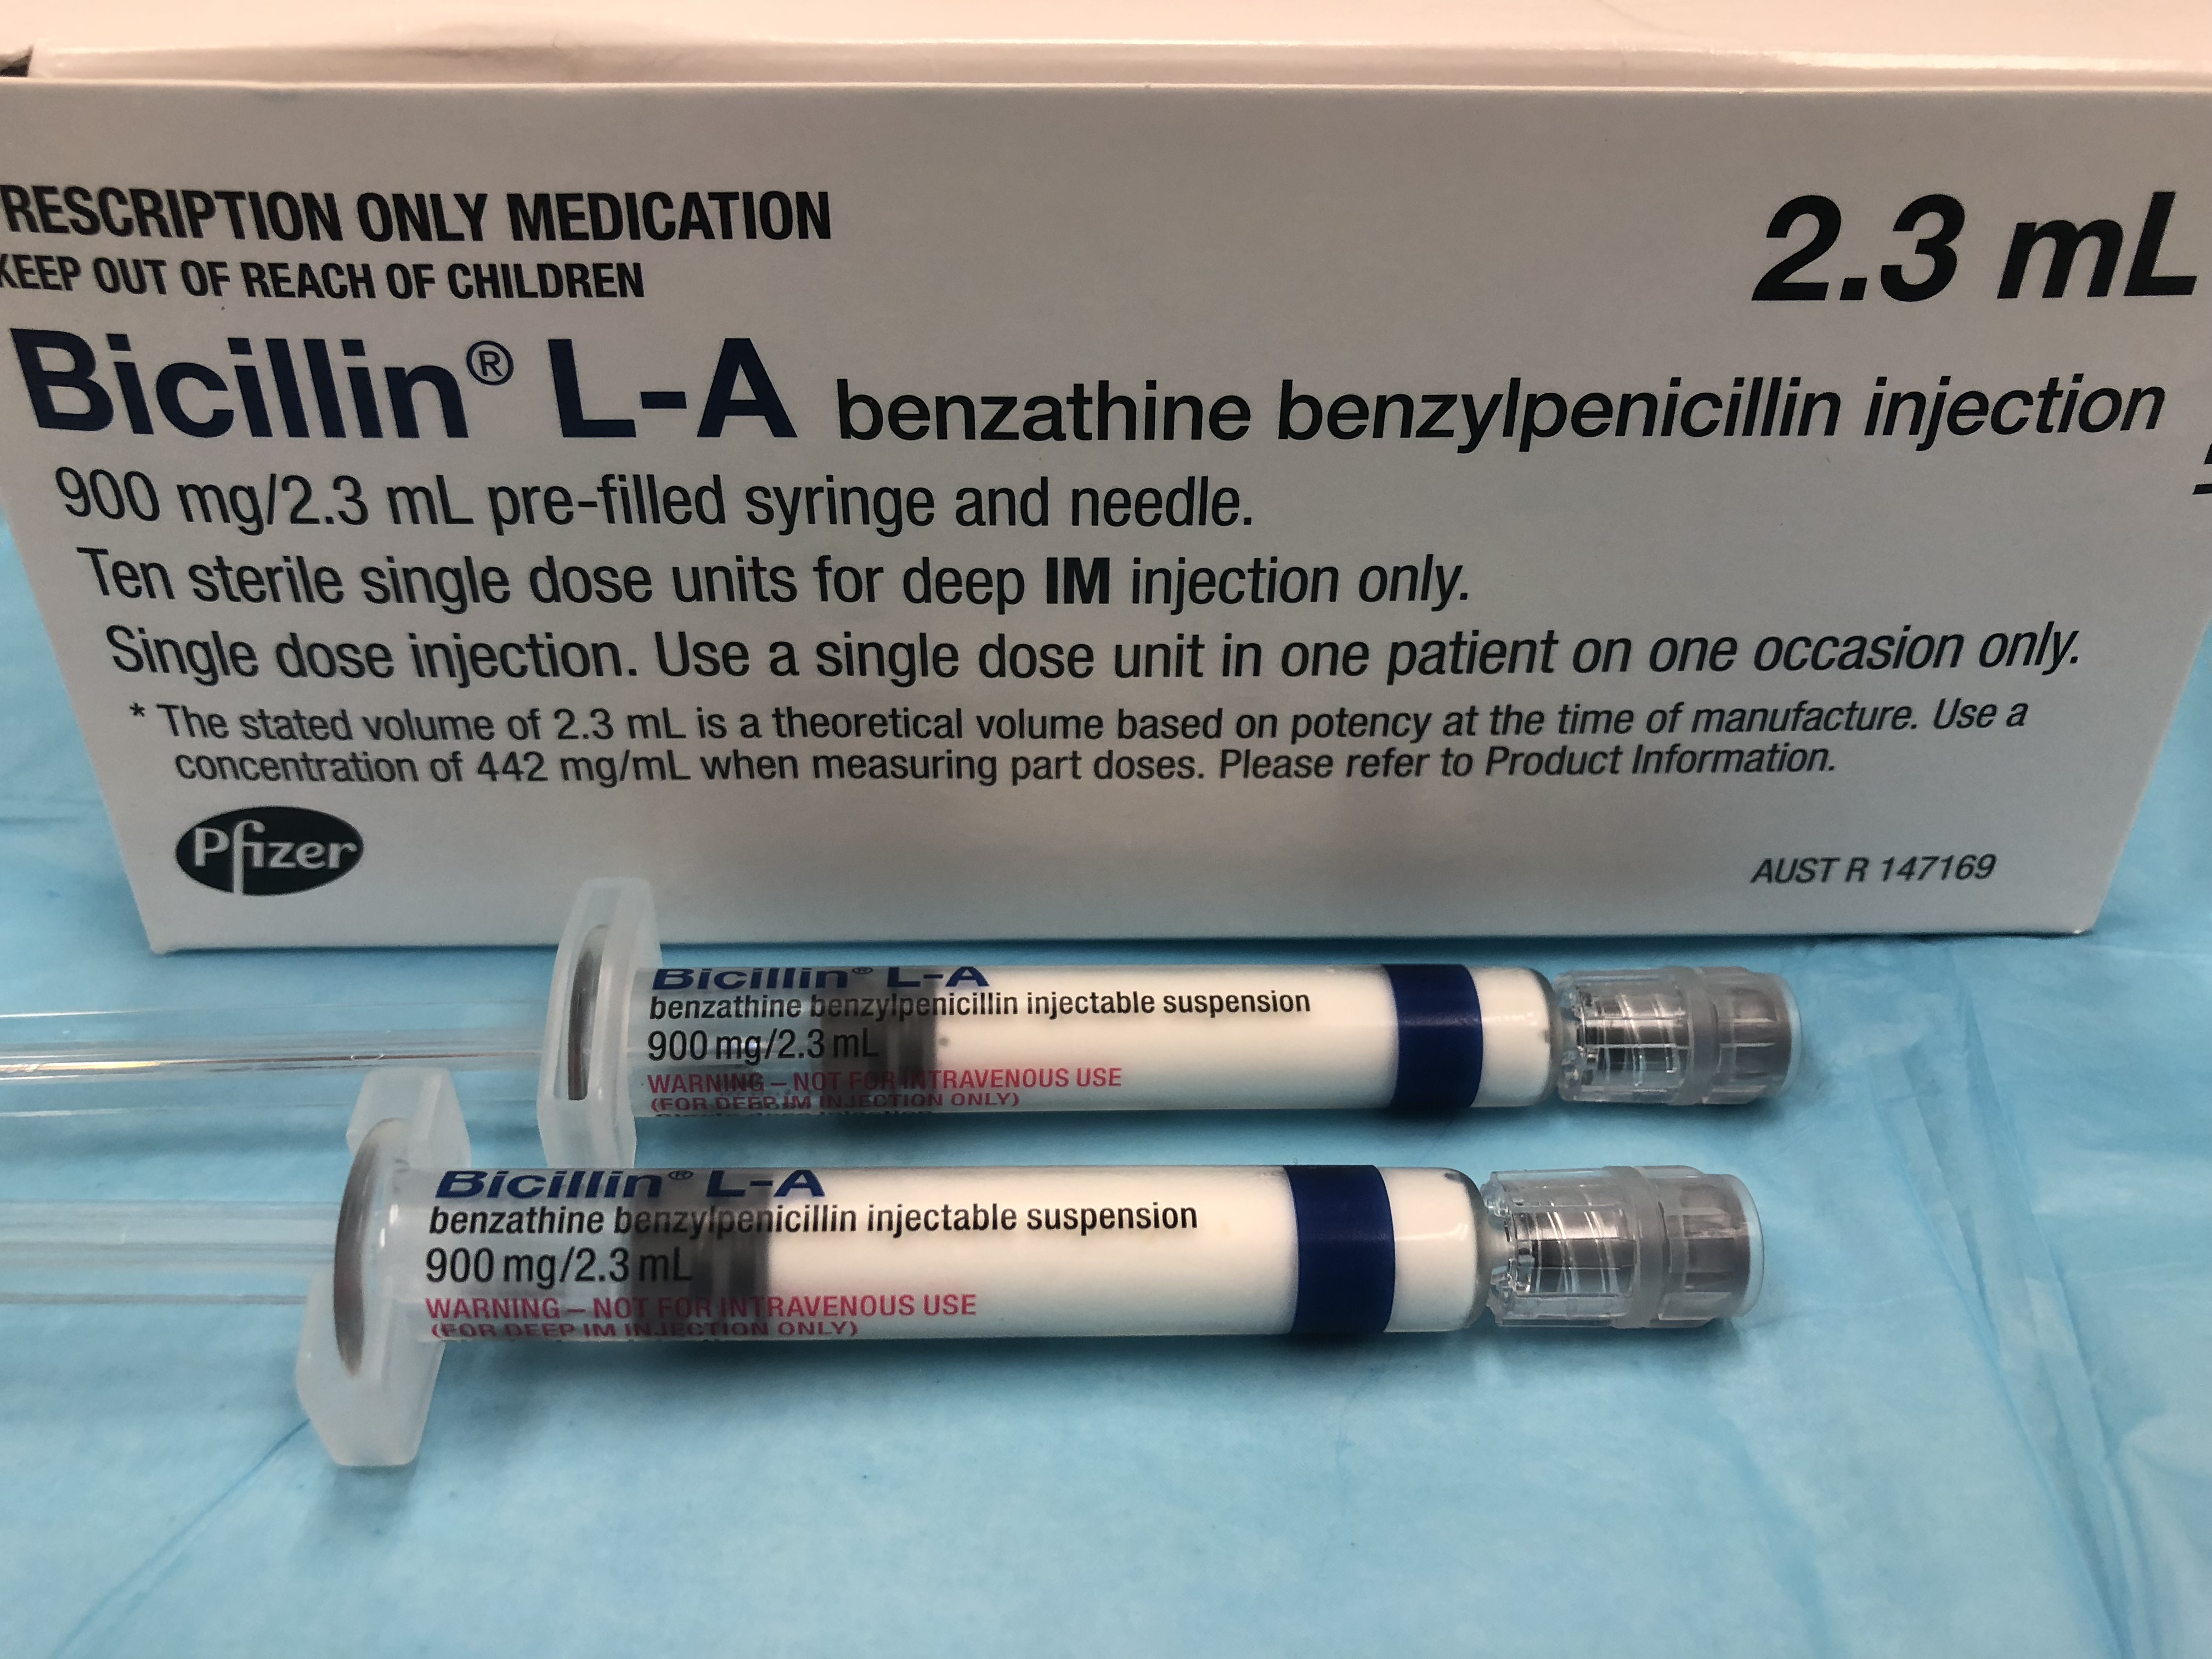 Box and two syringes of Bicillin